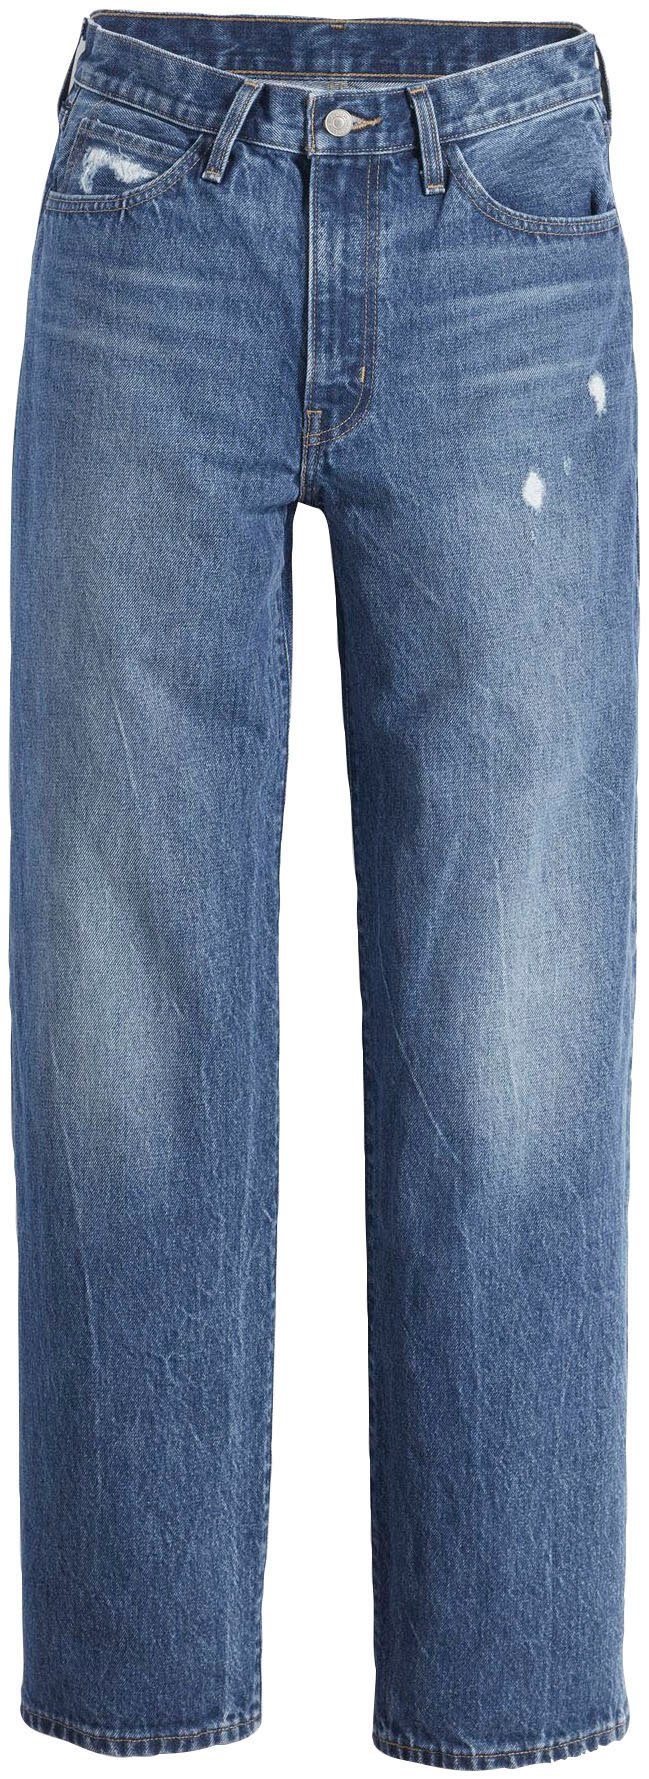 Levi's® Gerade Jeans MIDDY used blue STRAIGHT